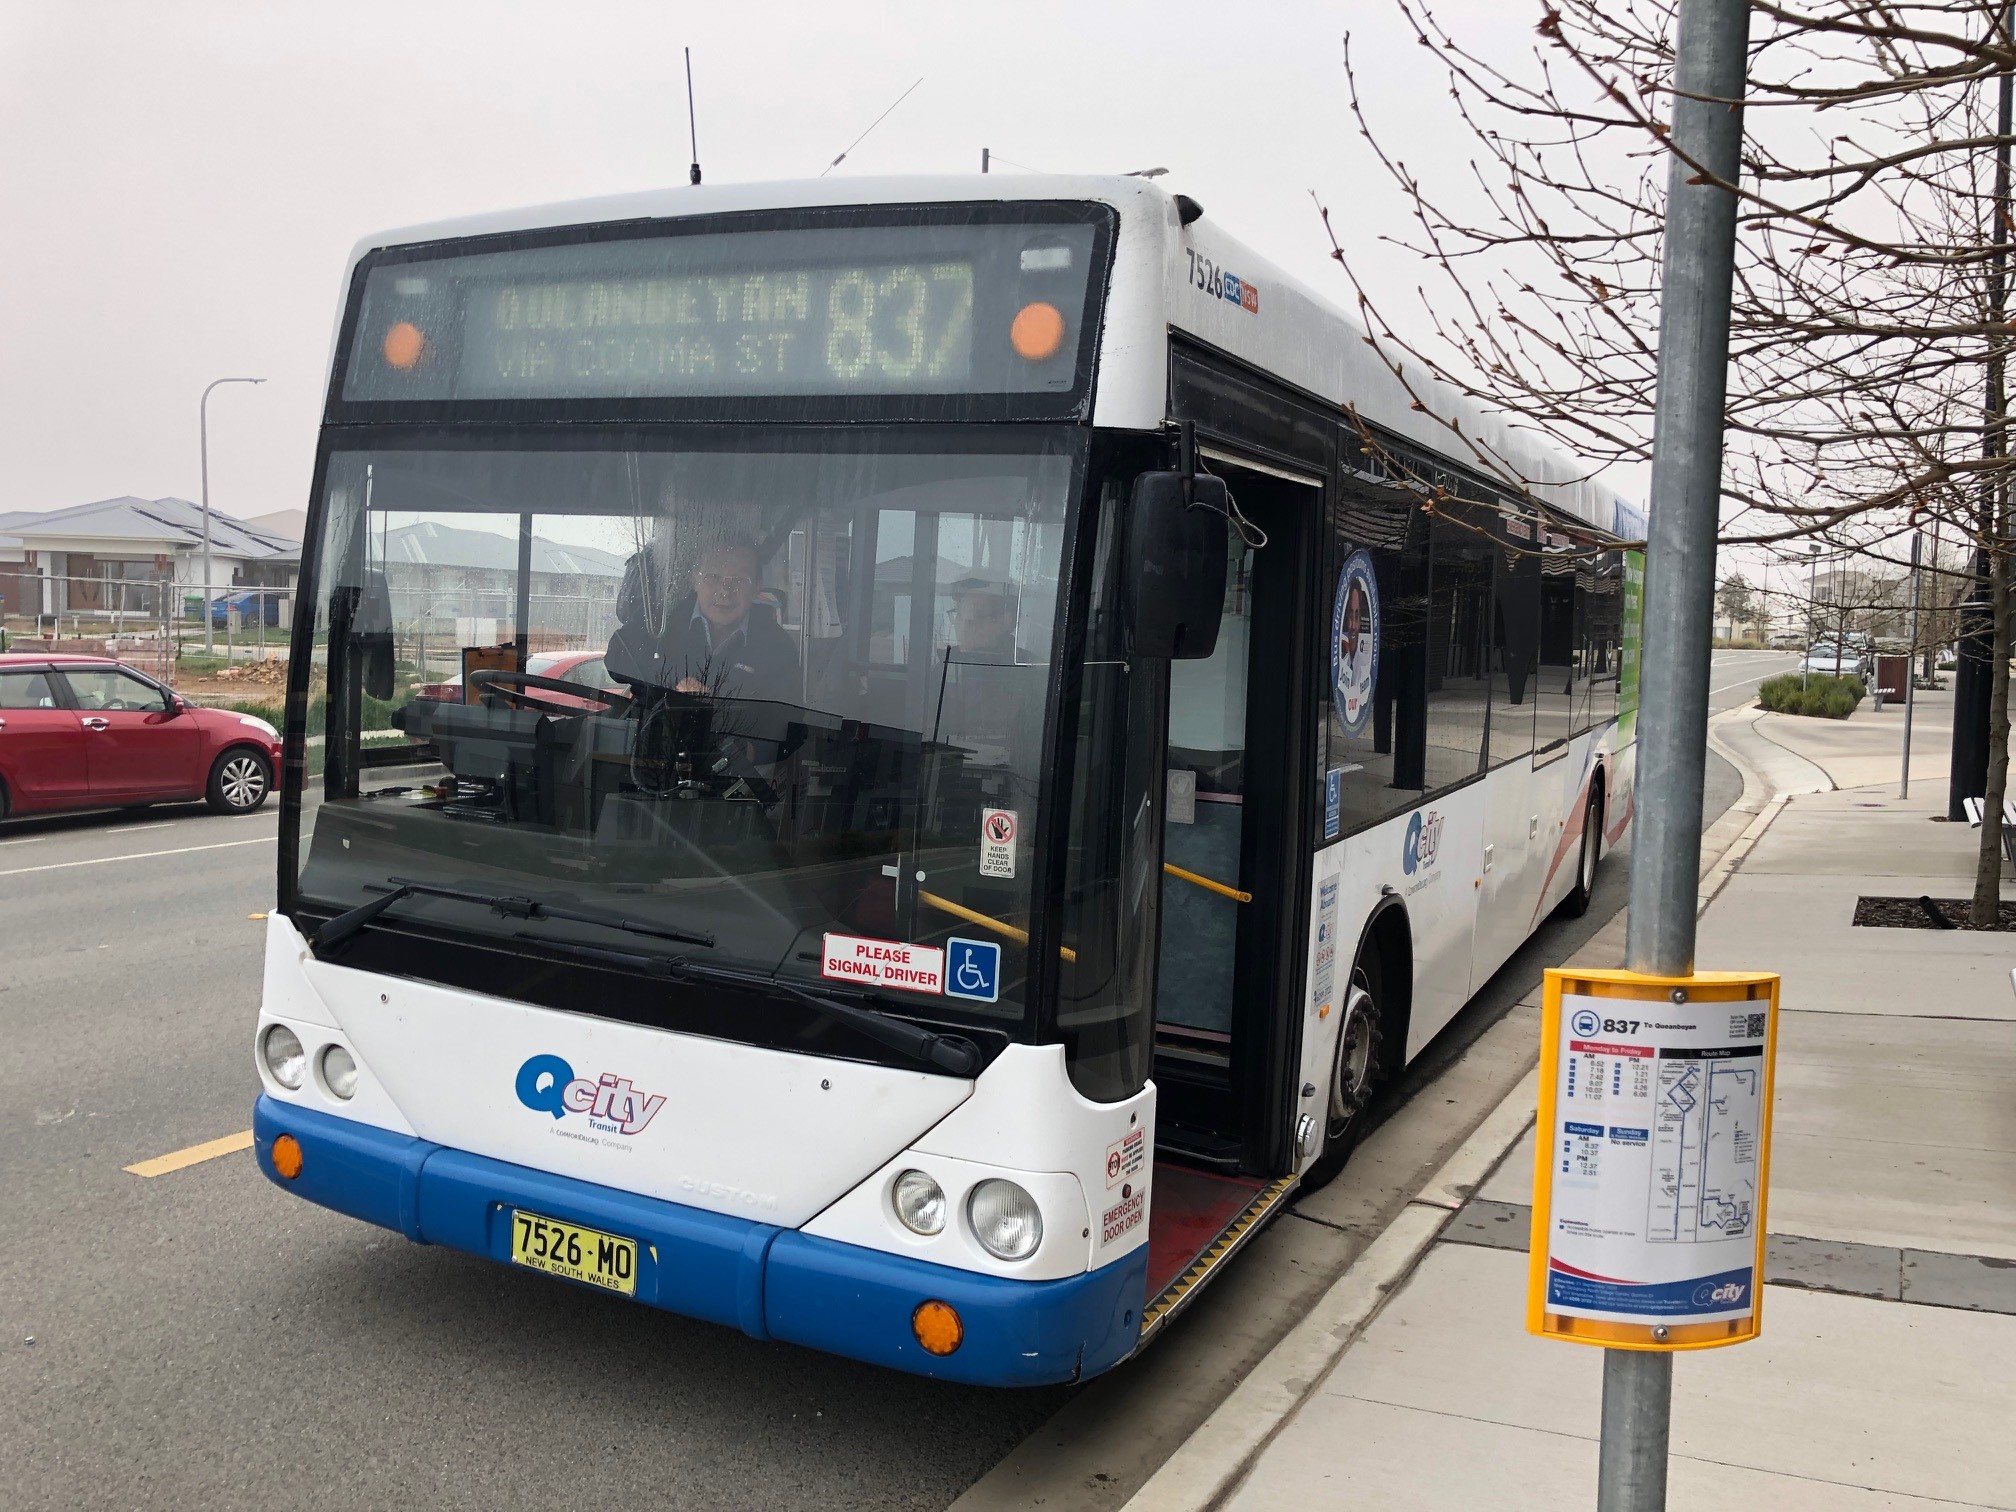 All aboard! Lobby group makes the case for better cross-border bus connections